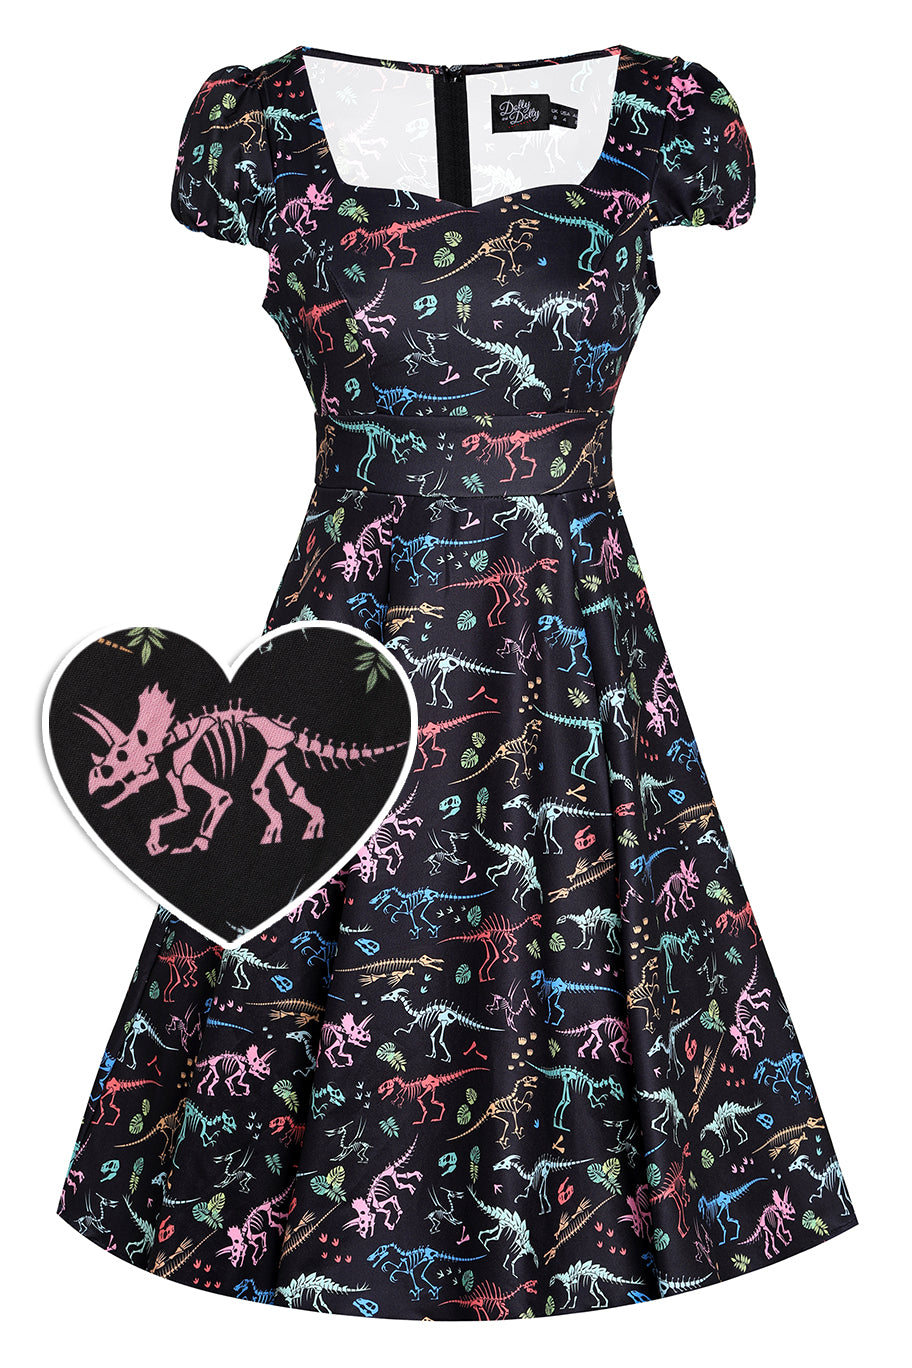 Front View of Dinosaur Fossil Print Dress in Black